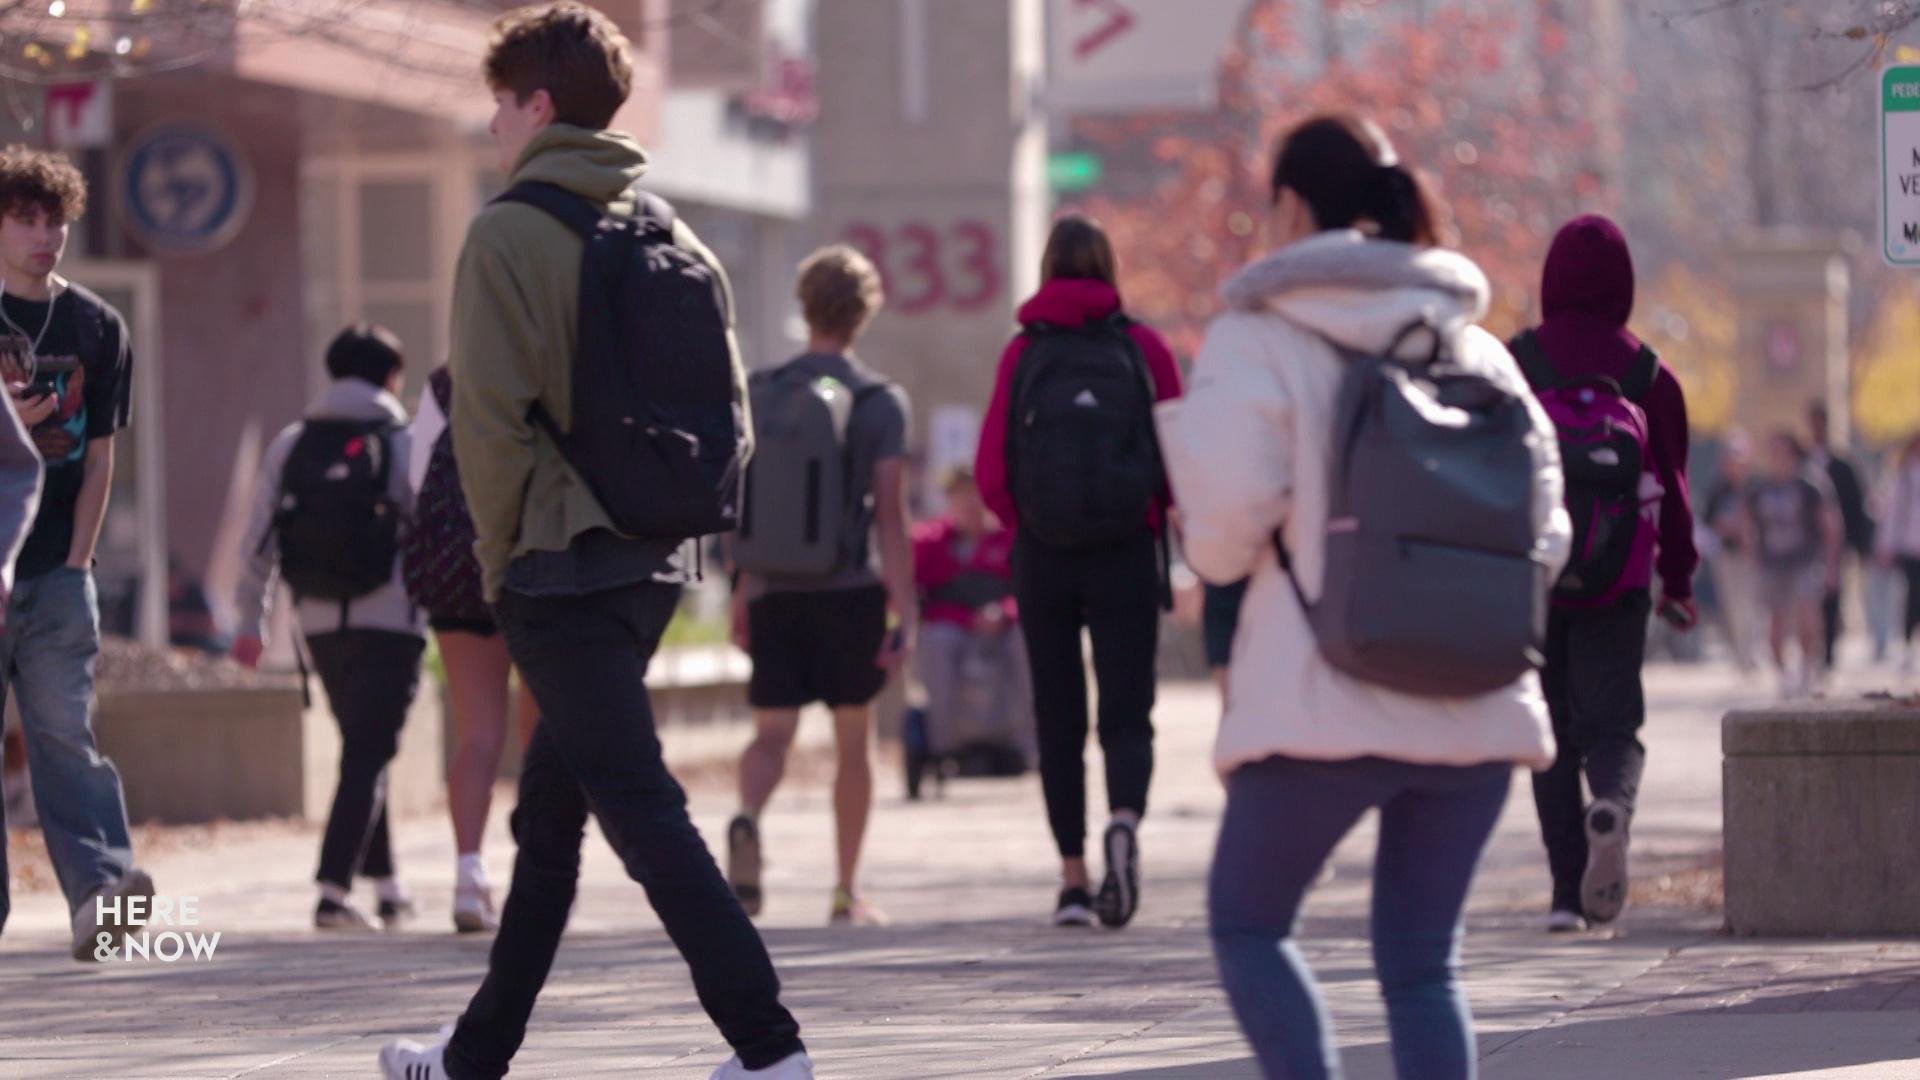 A still image shows various students with backpacks walking on a paved street outside.